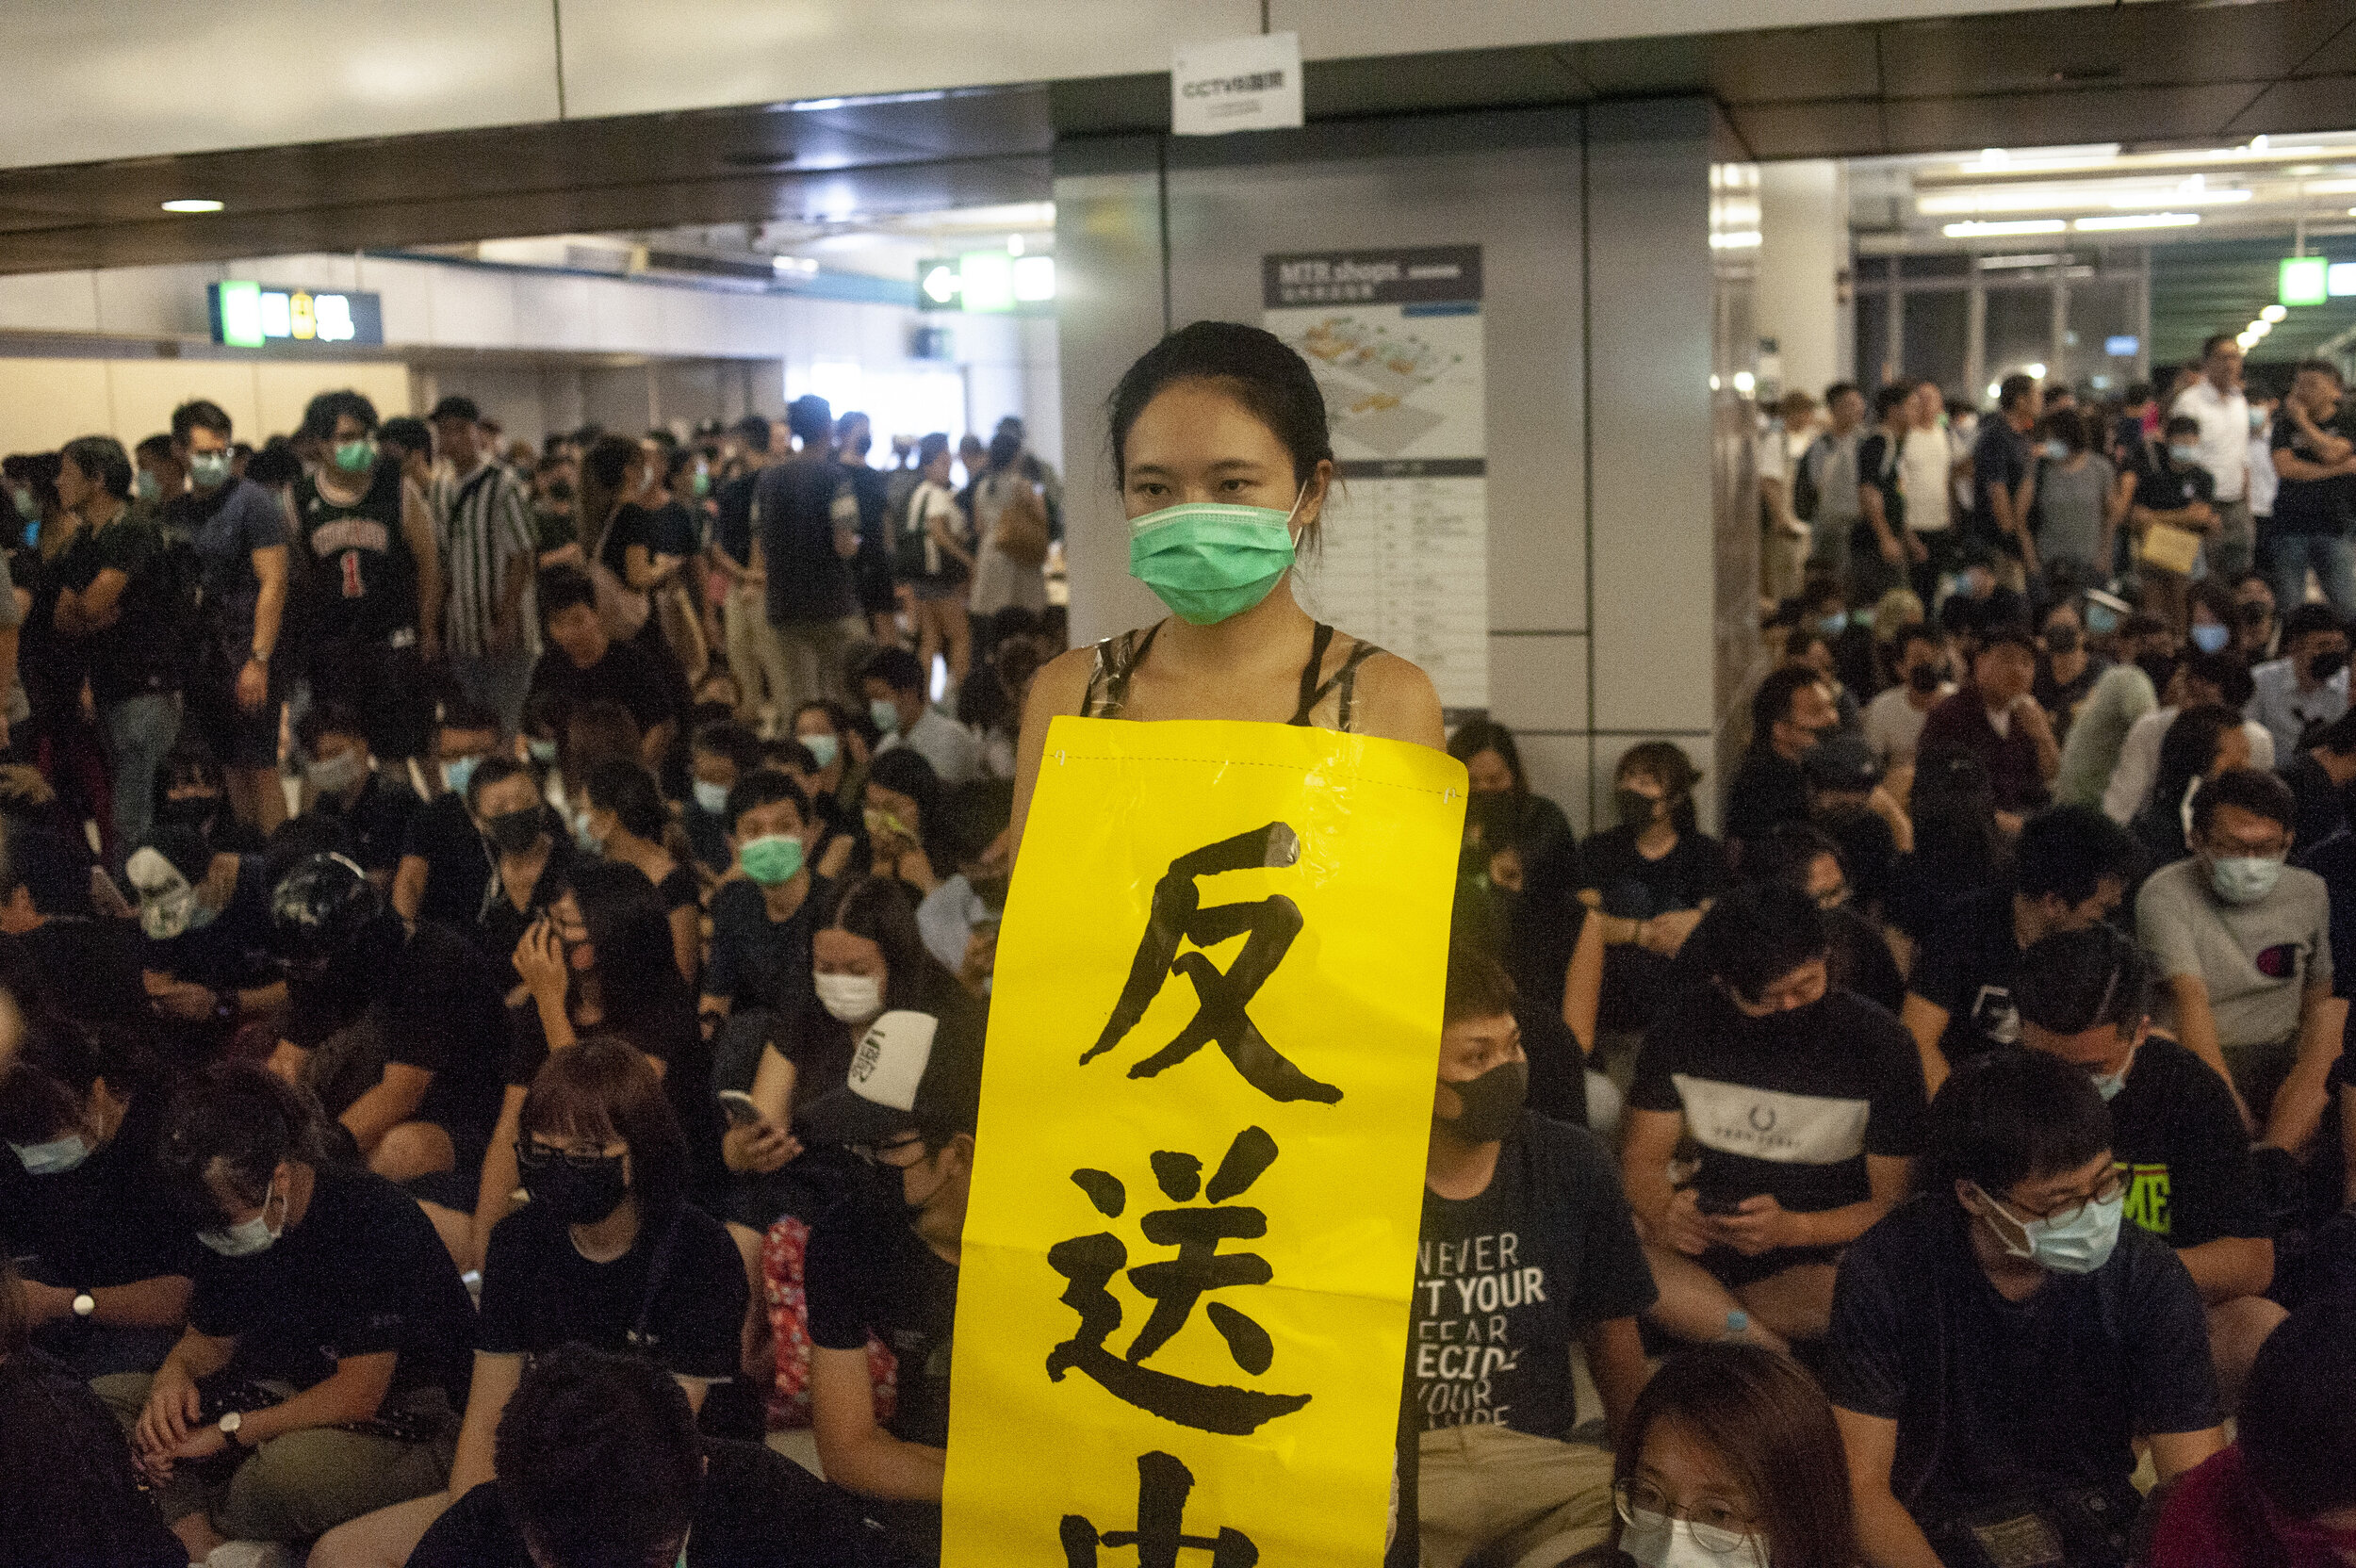  A pro-democracy protester holds a sign while attending a sit-in with other protesters at Yeung Long Station on August 21, 2019. The sit-in was organized to coincide with the one week anniversary of the beatings of protesters at the hands of masked m